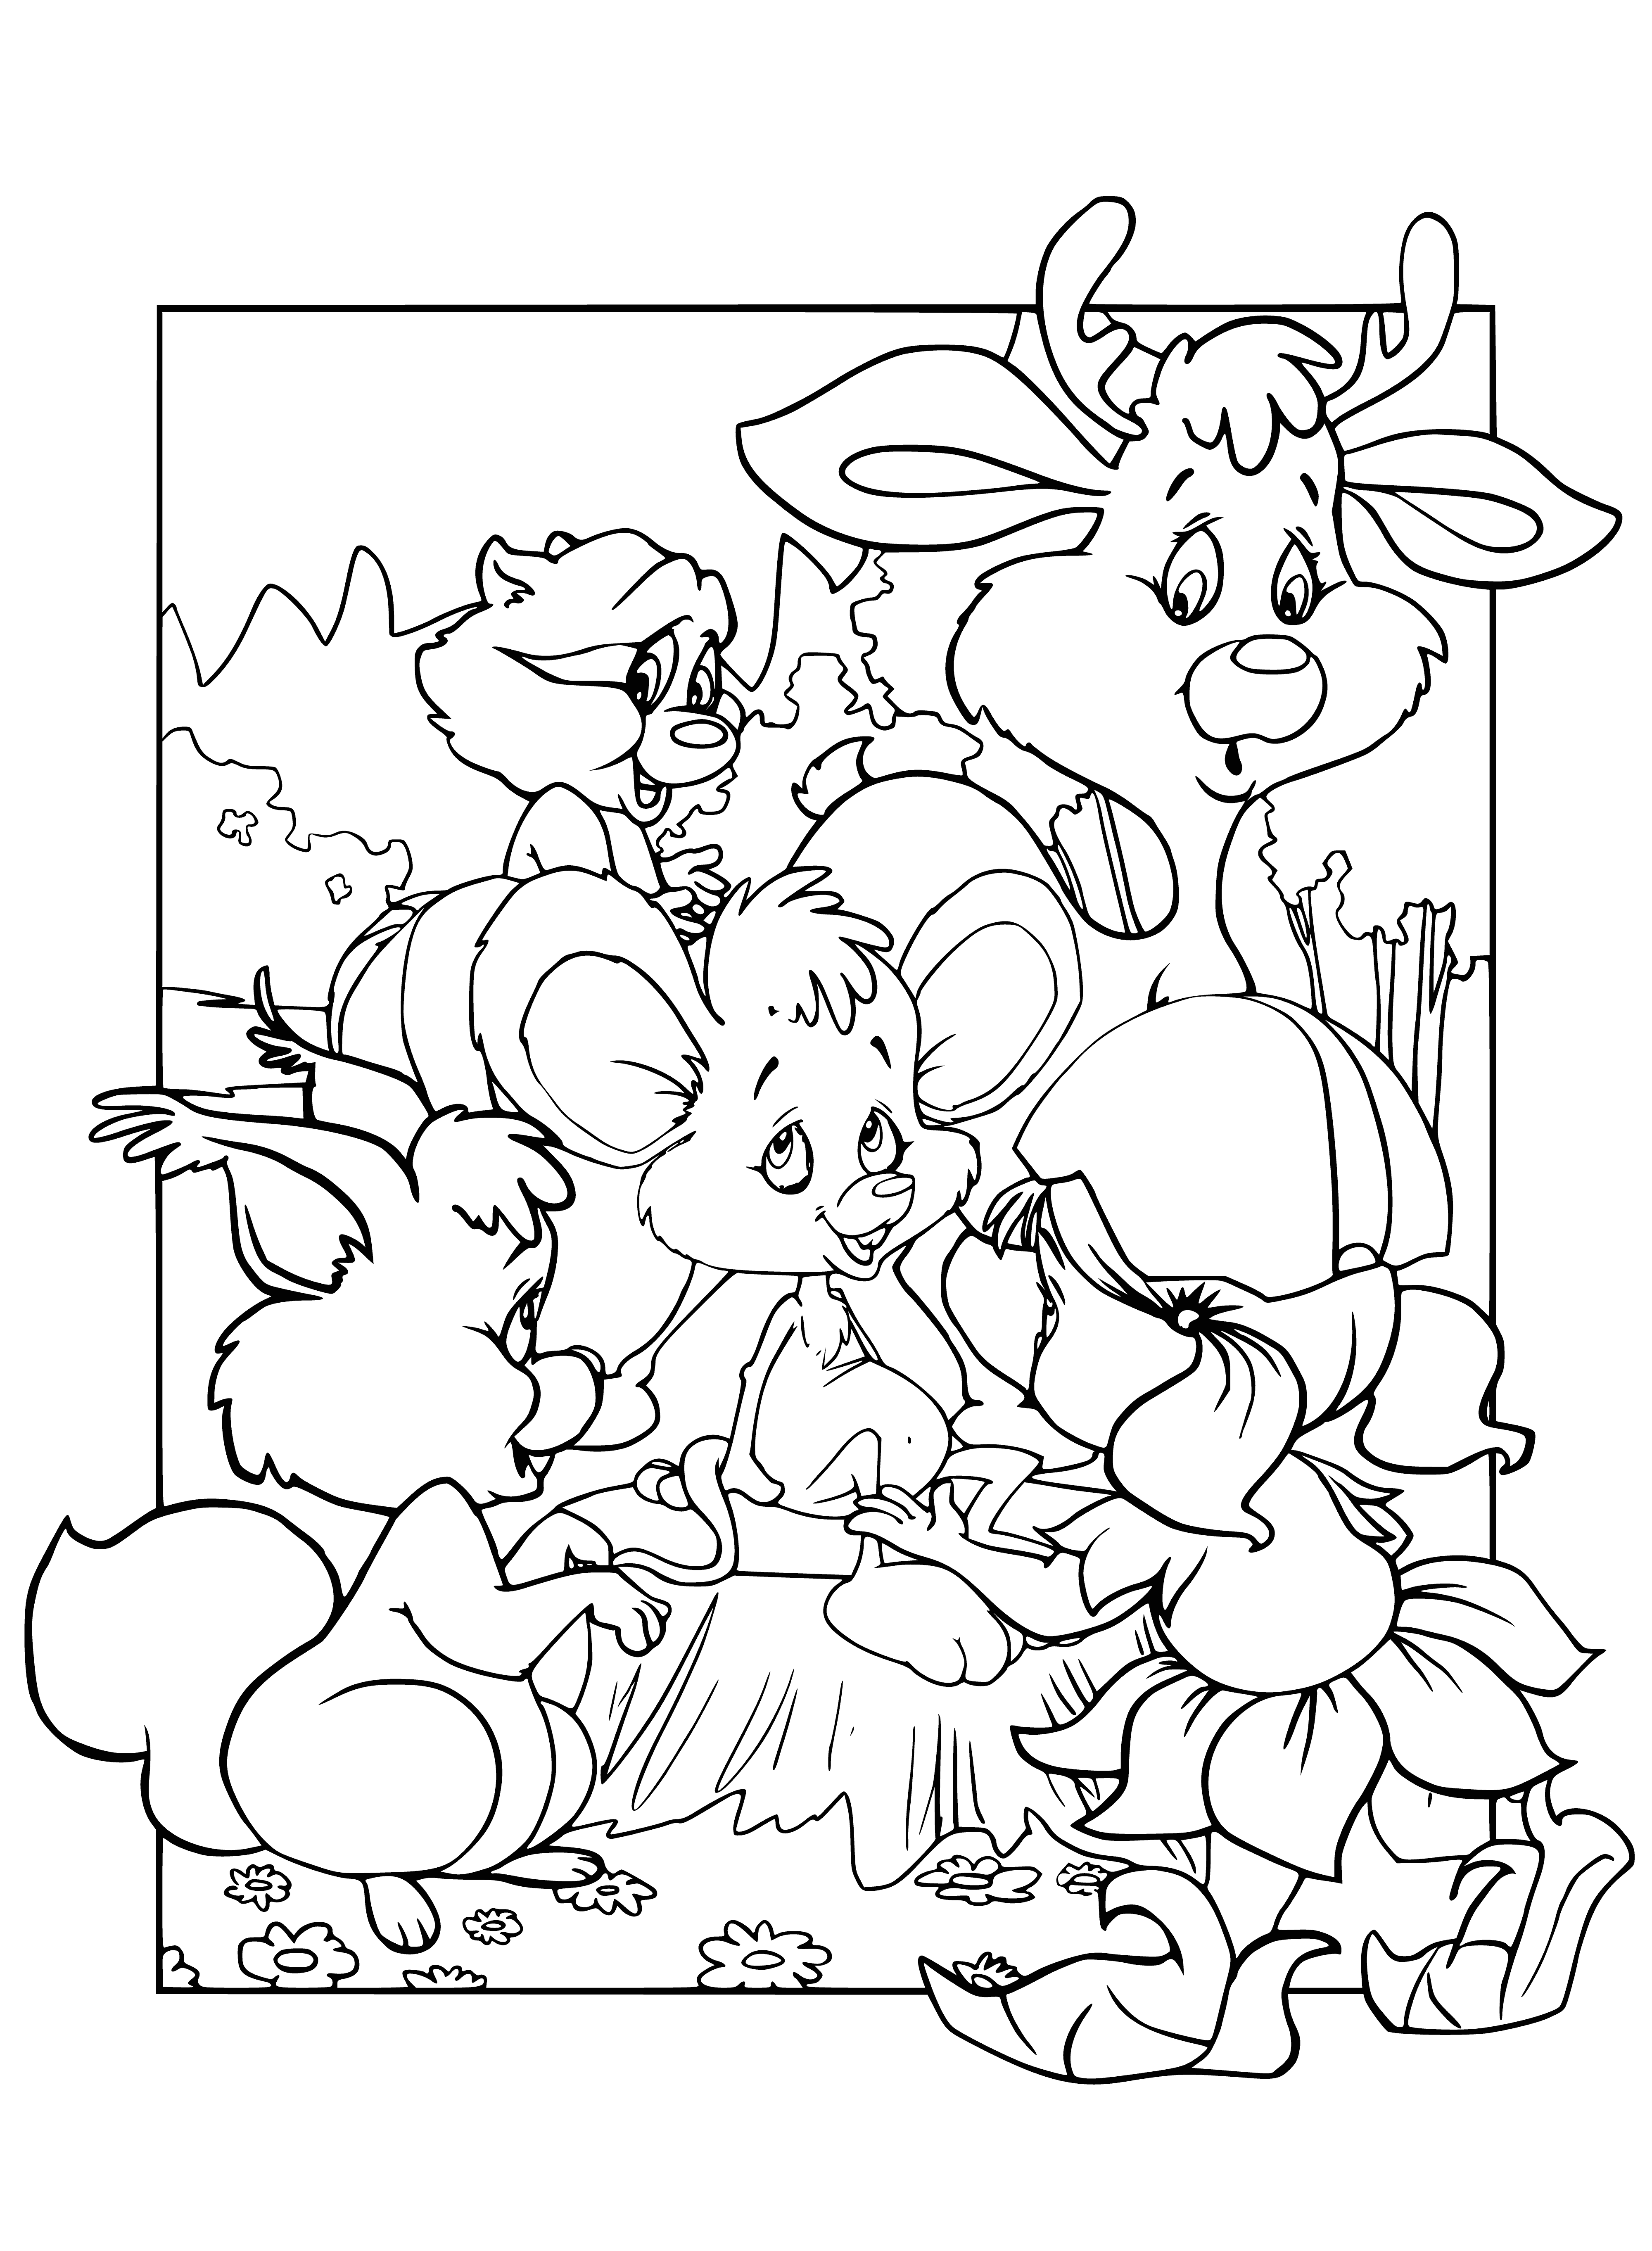 coloring page: 3 animals in friendship: mouse, rabbit, squirrel. The mouse wears a blue dress and yellow scarf, rabbit a red sweater and blue scarf, and squirrel holds an acorn.